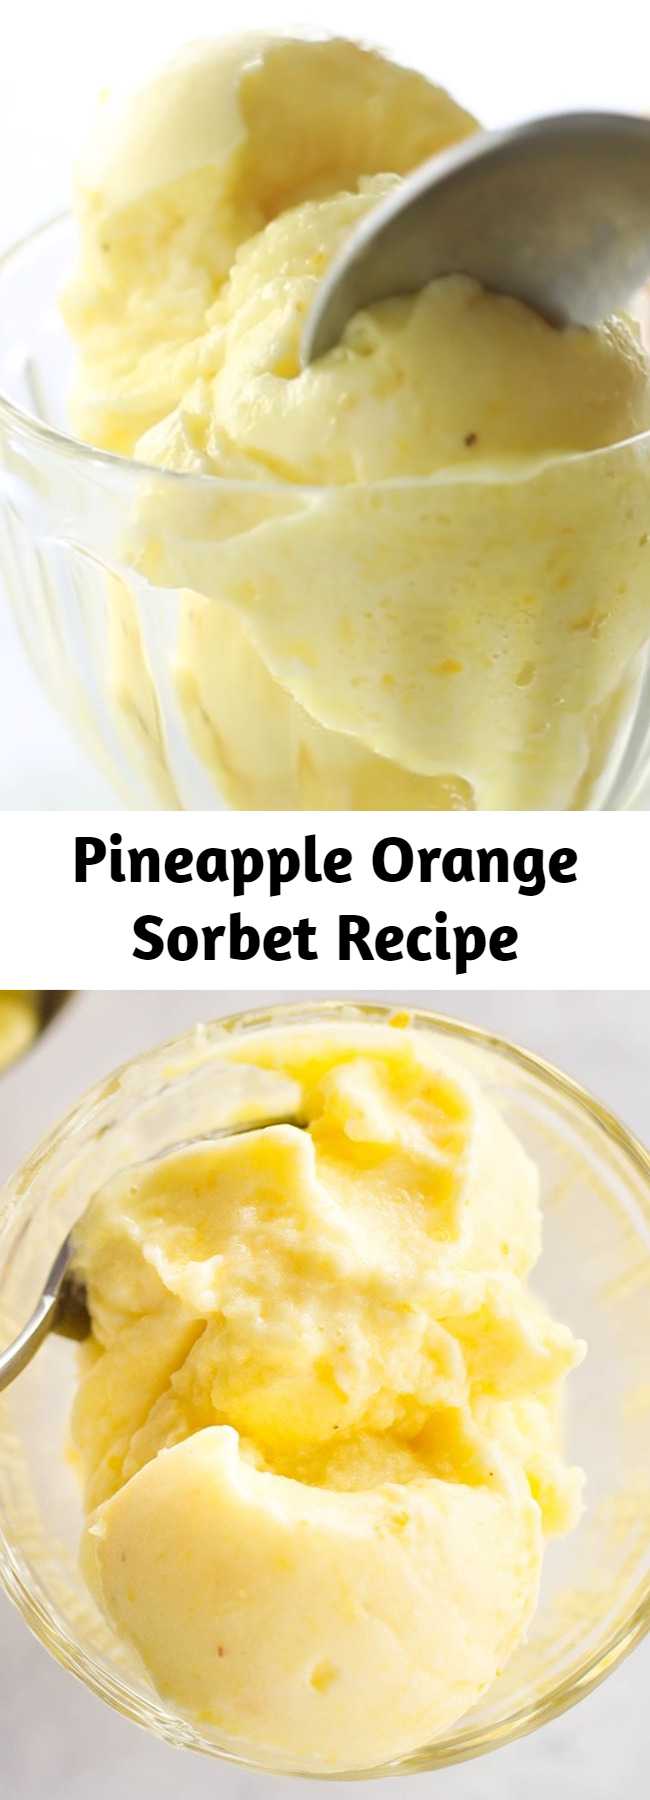 Pineapple Orange Sorbet Recipe - Sorbet is sweeter when you make it with two fruits instead of just one.